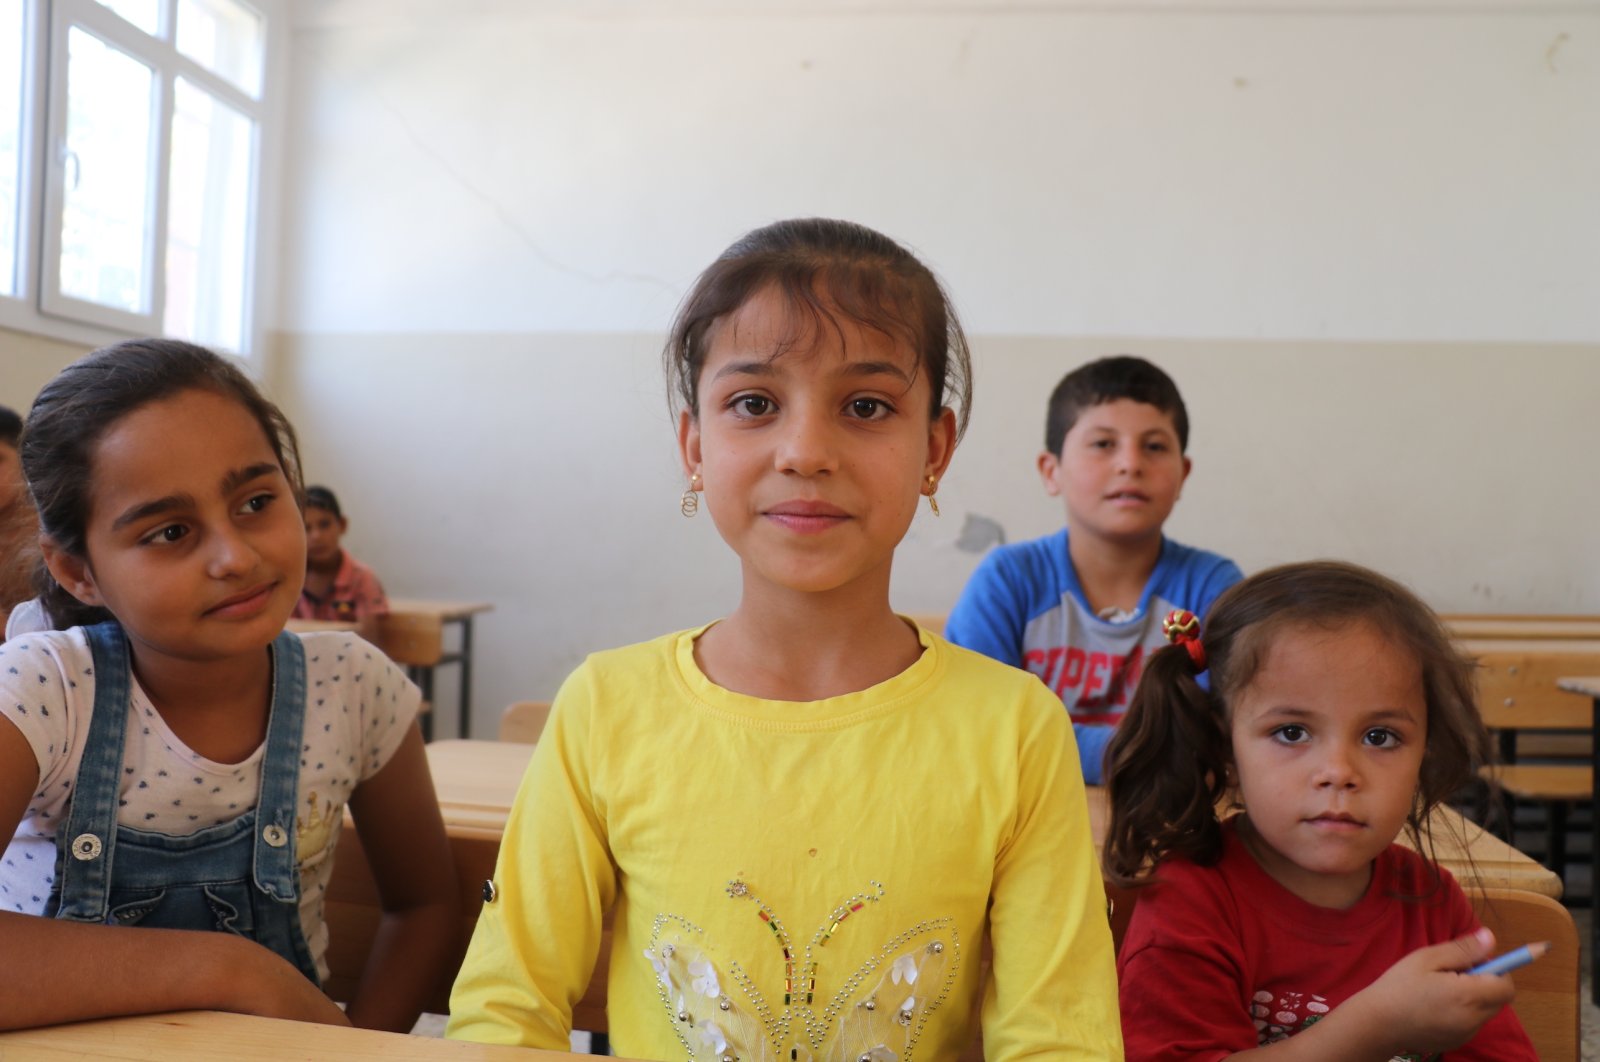 The new school year started in Tal Abyad and Ras al-Ain, Syria, Sept. 11, 2022 (AA Photo)